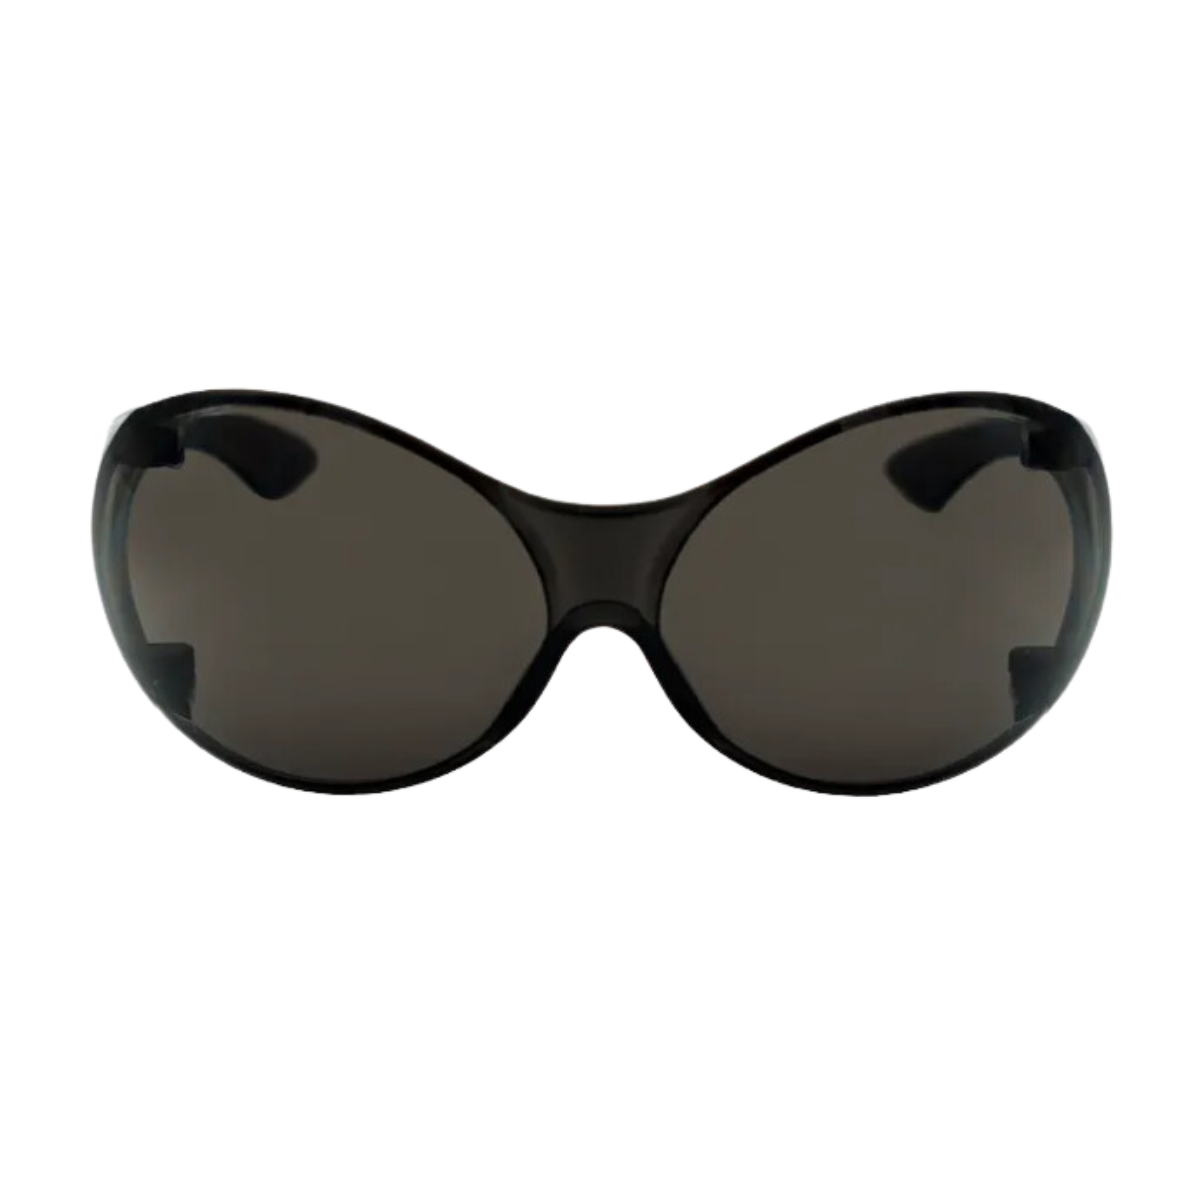 The Fly Sunglasses